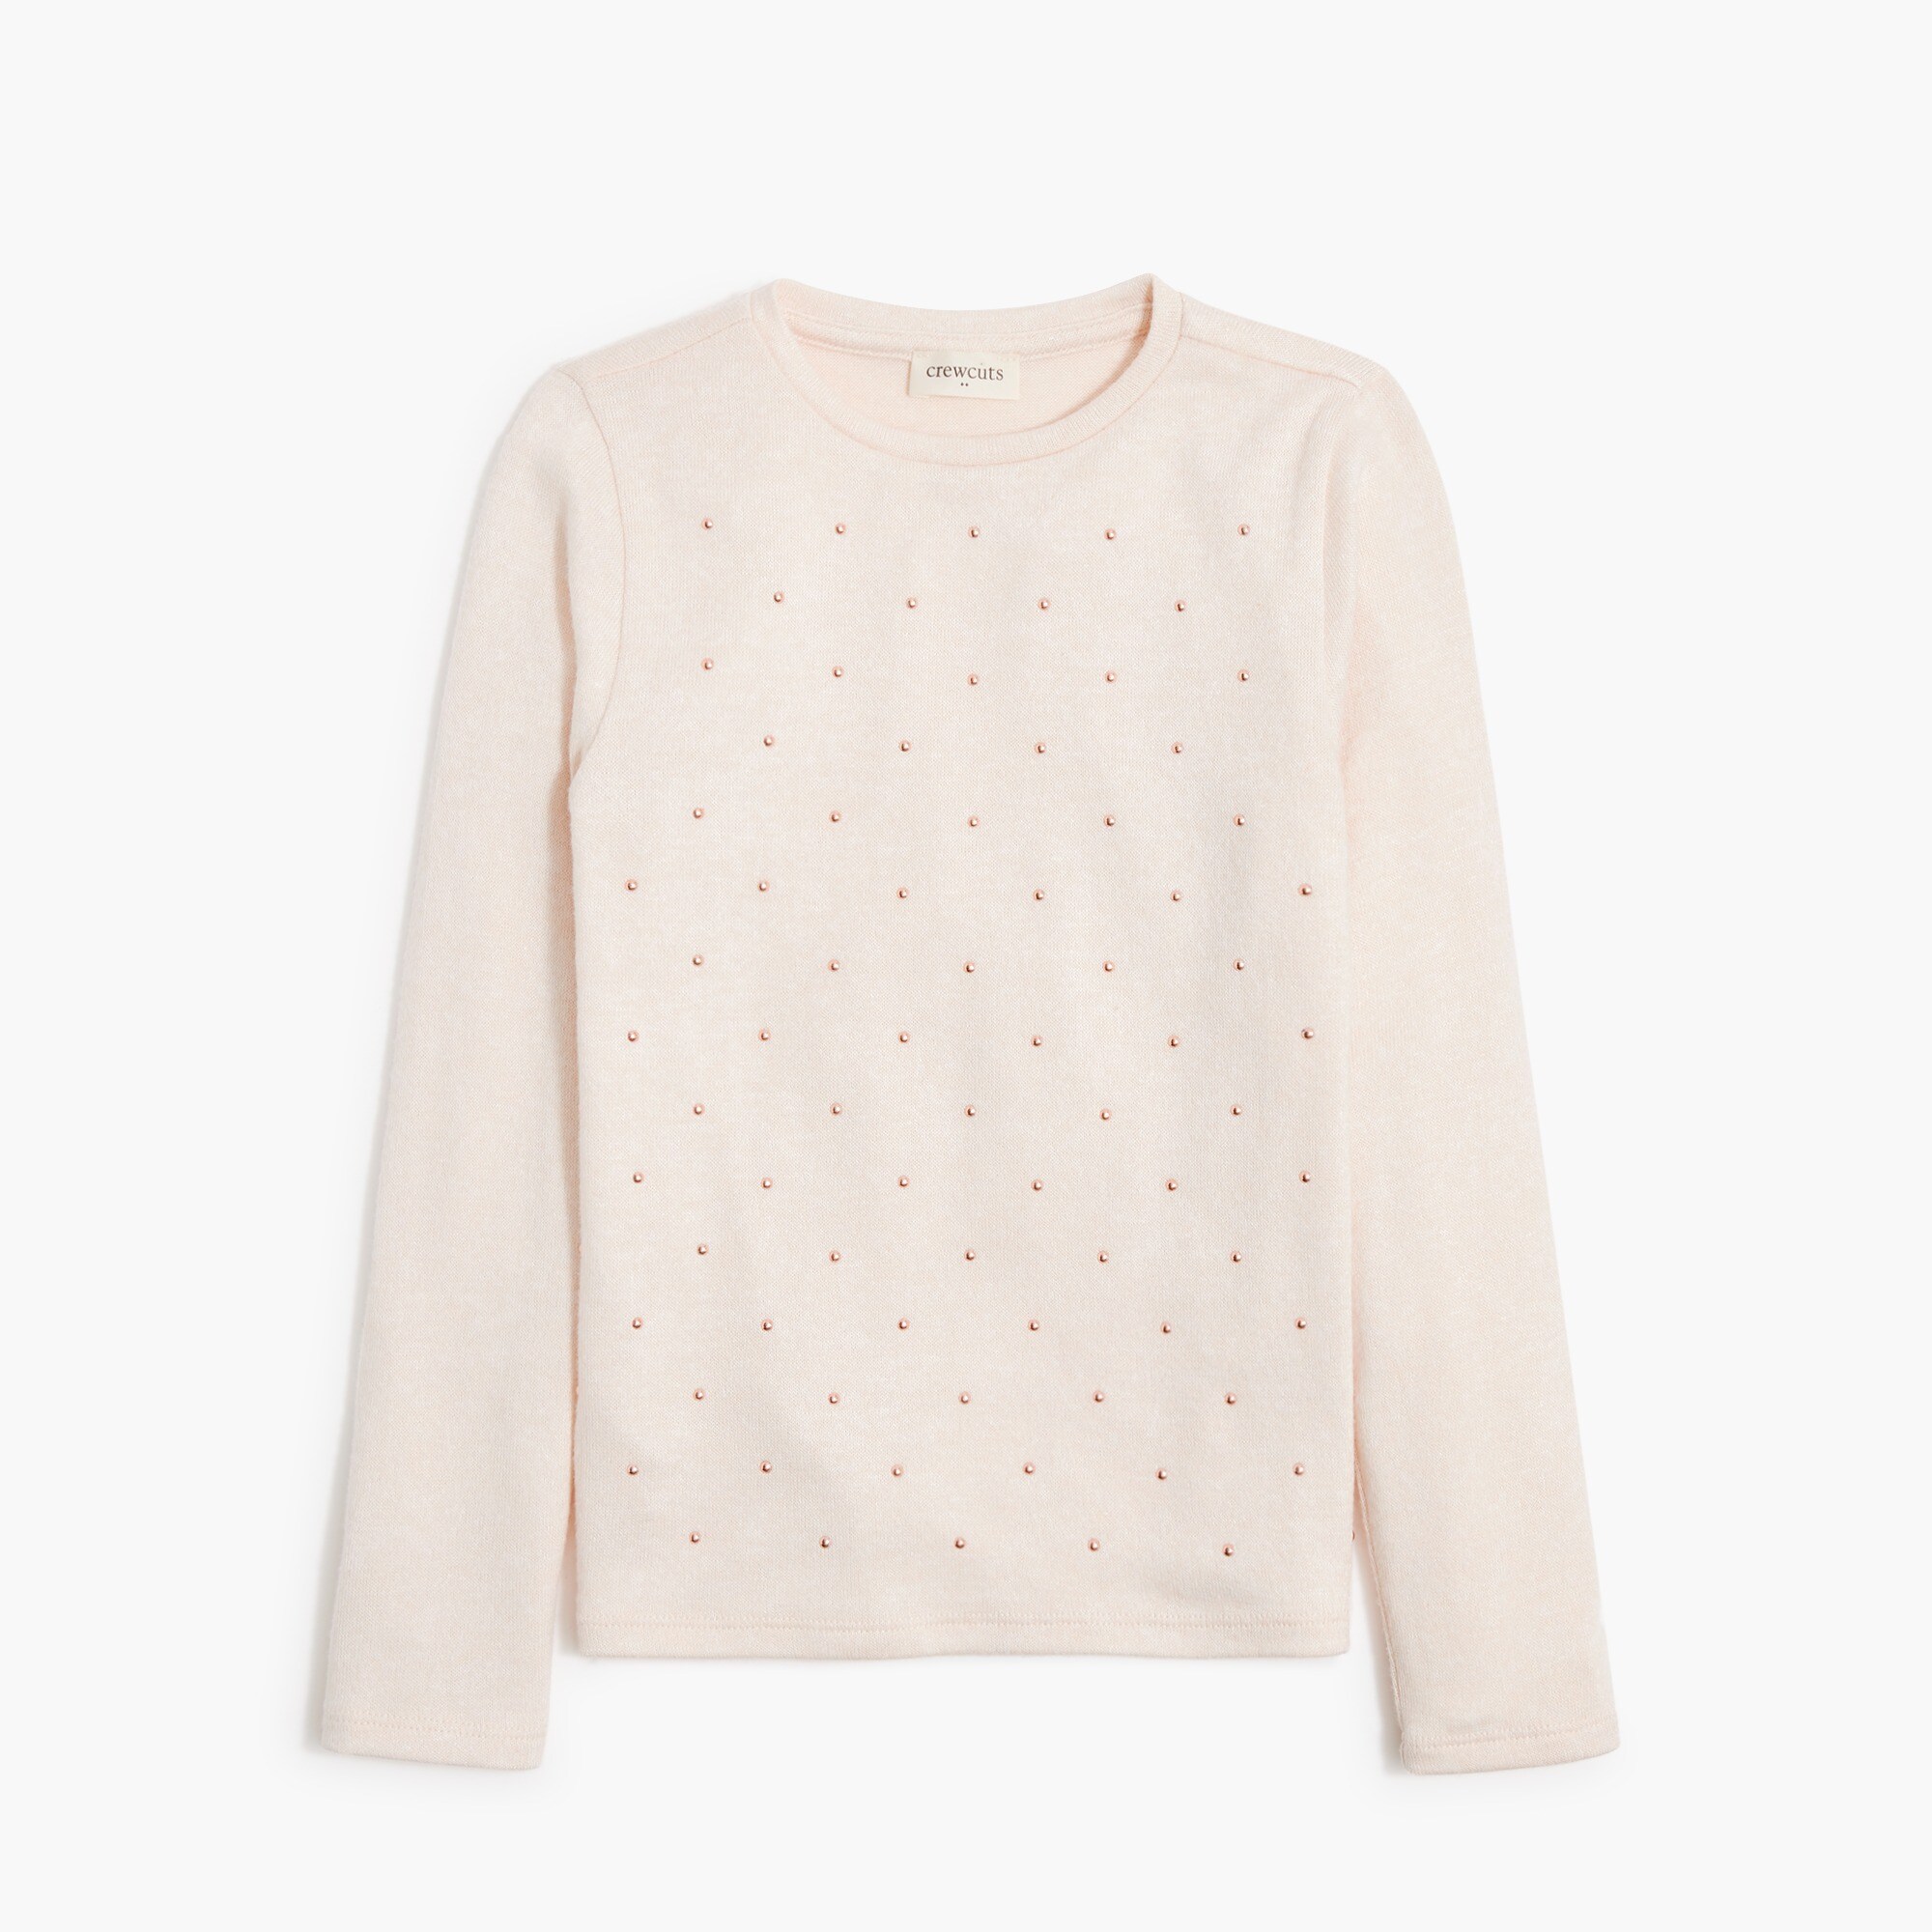  Girls' extra-soft bejeweled top